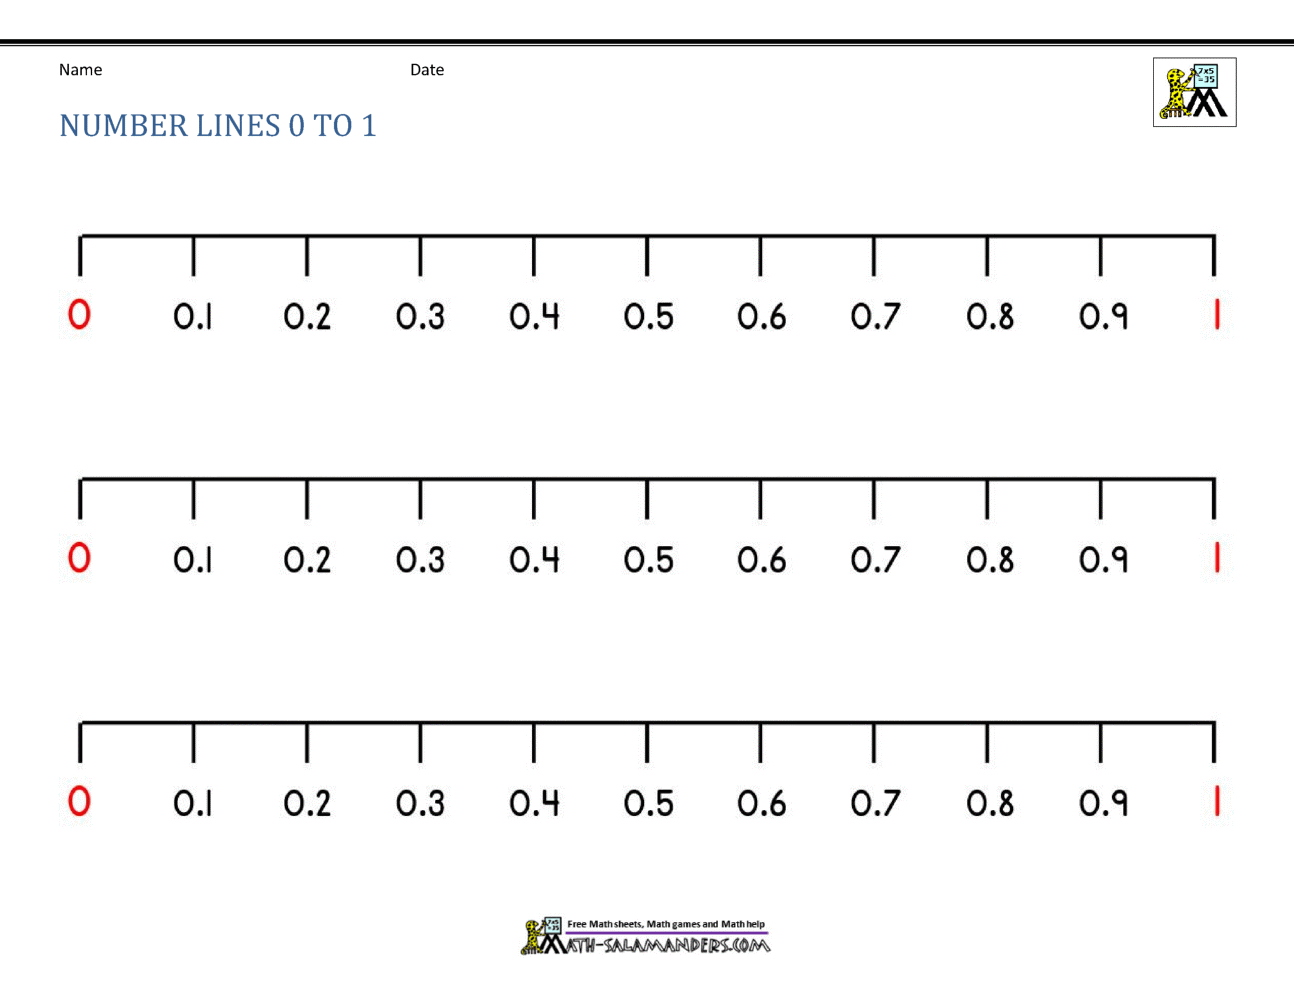 Standard Number Lines 0 to 1 Sheet 3b.